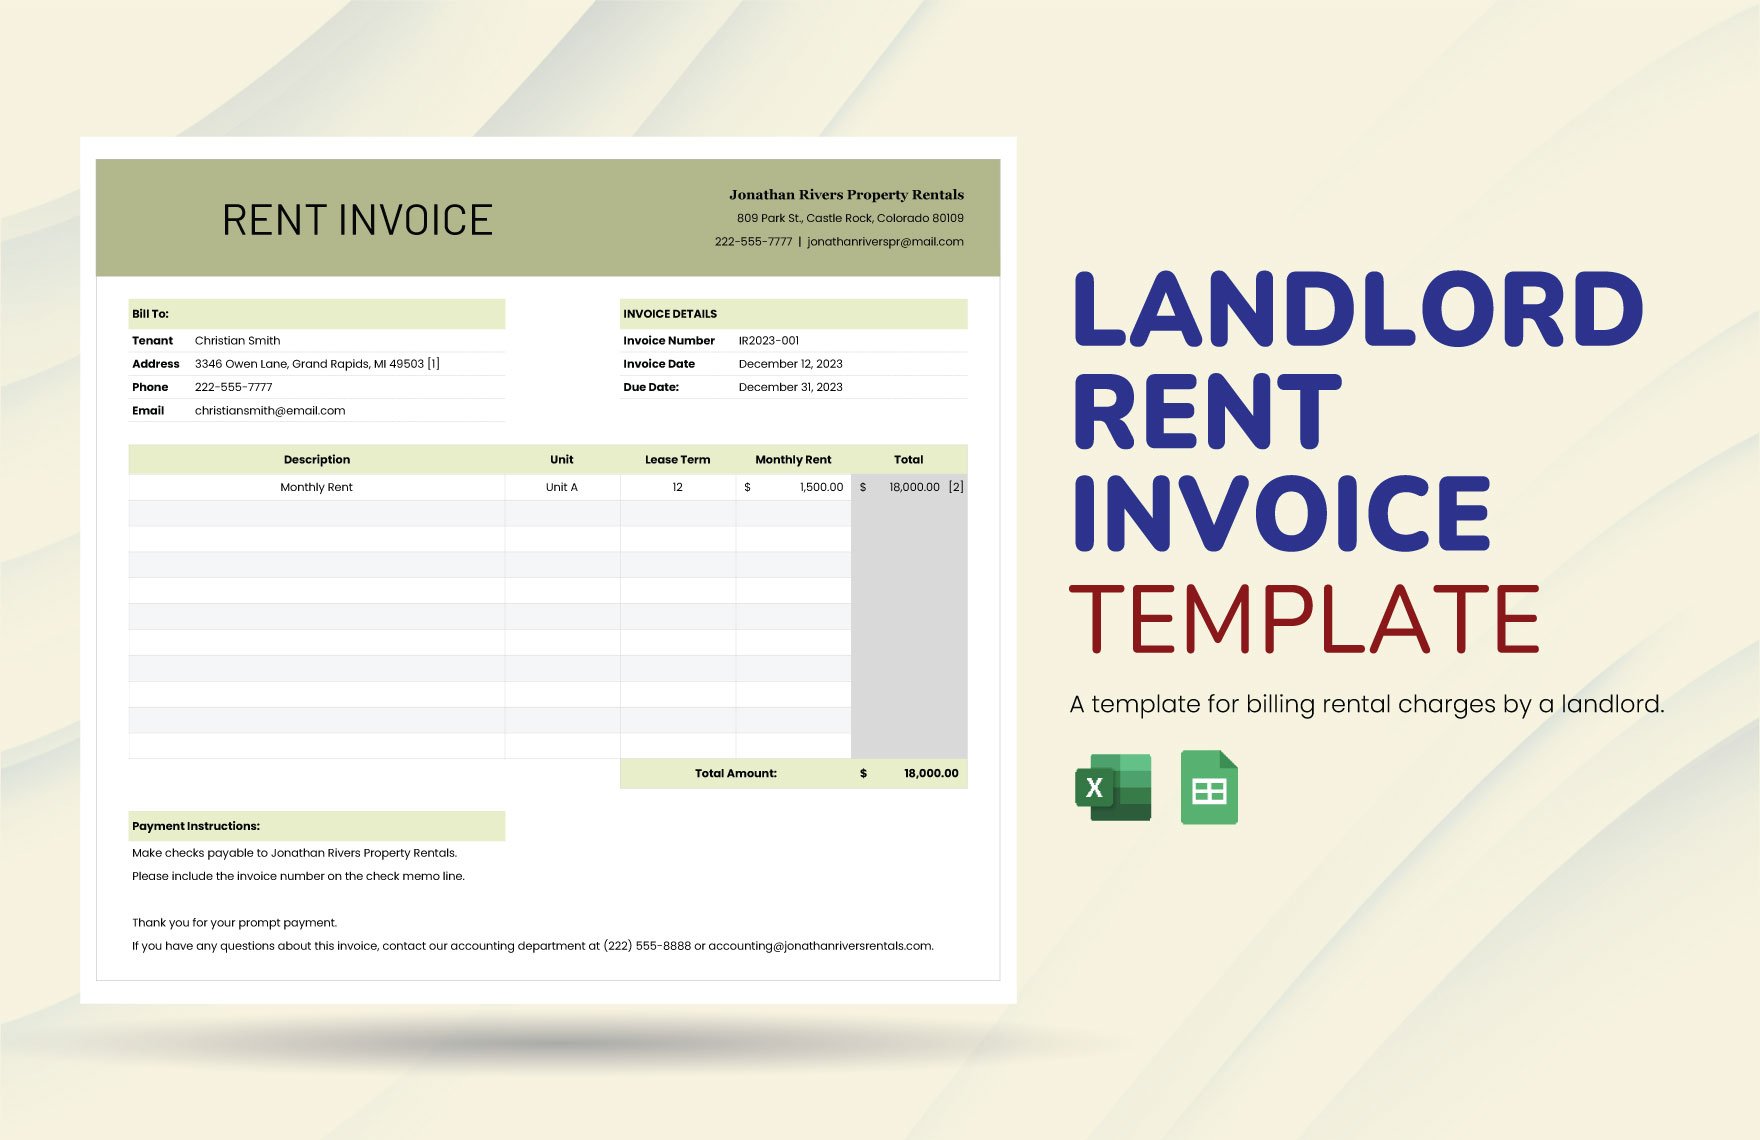 Landlord Rent Invoice Template